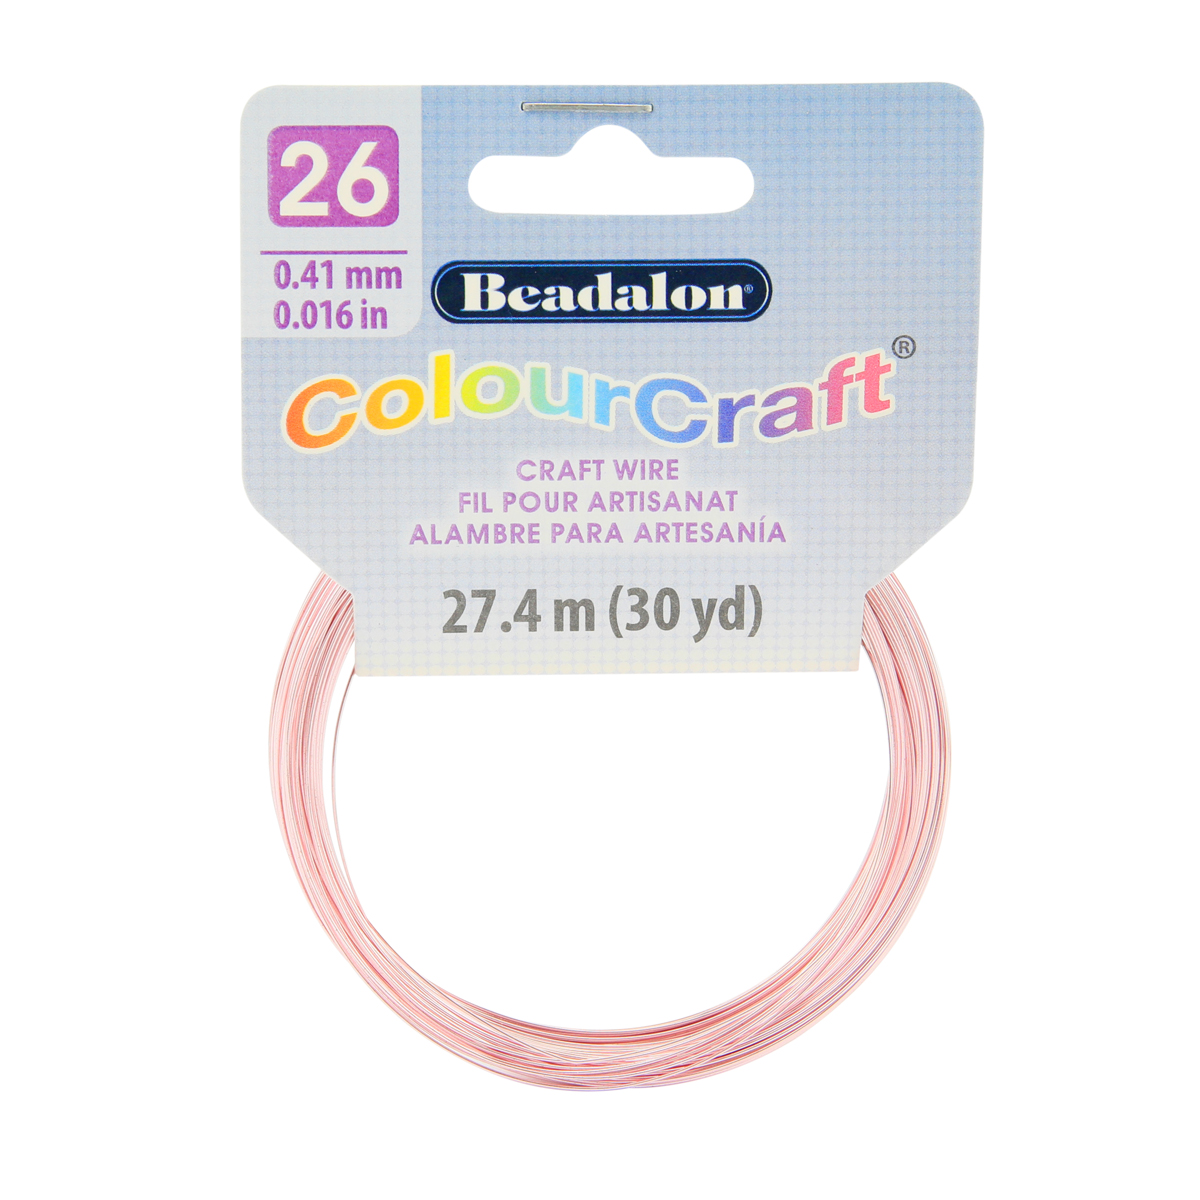 ColourCraft Wire, 26 Gauge (0.017 in, 0.40 mm), Pink (Silver Plated), 27.4  m (30 yd) Coil